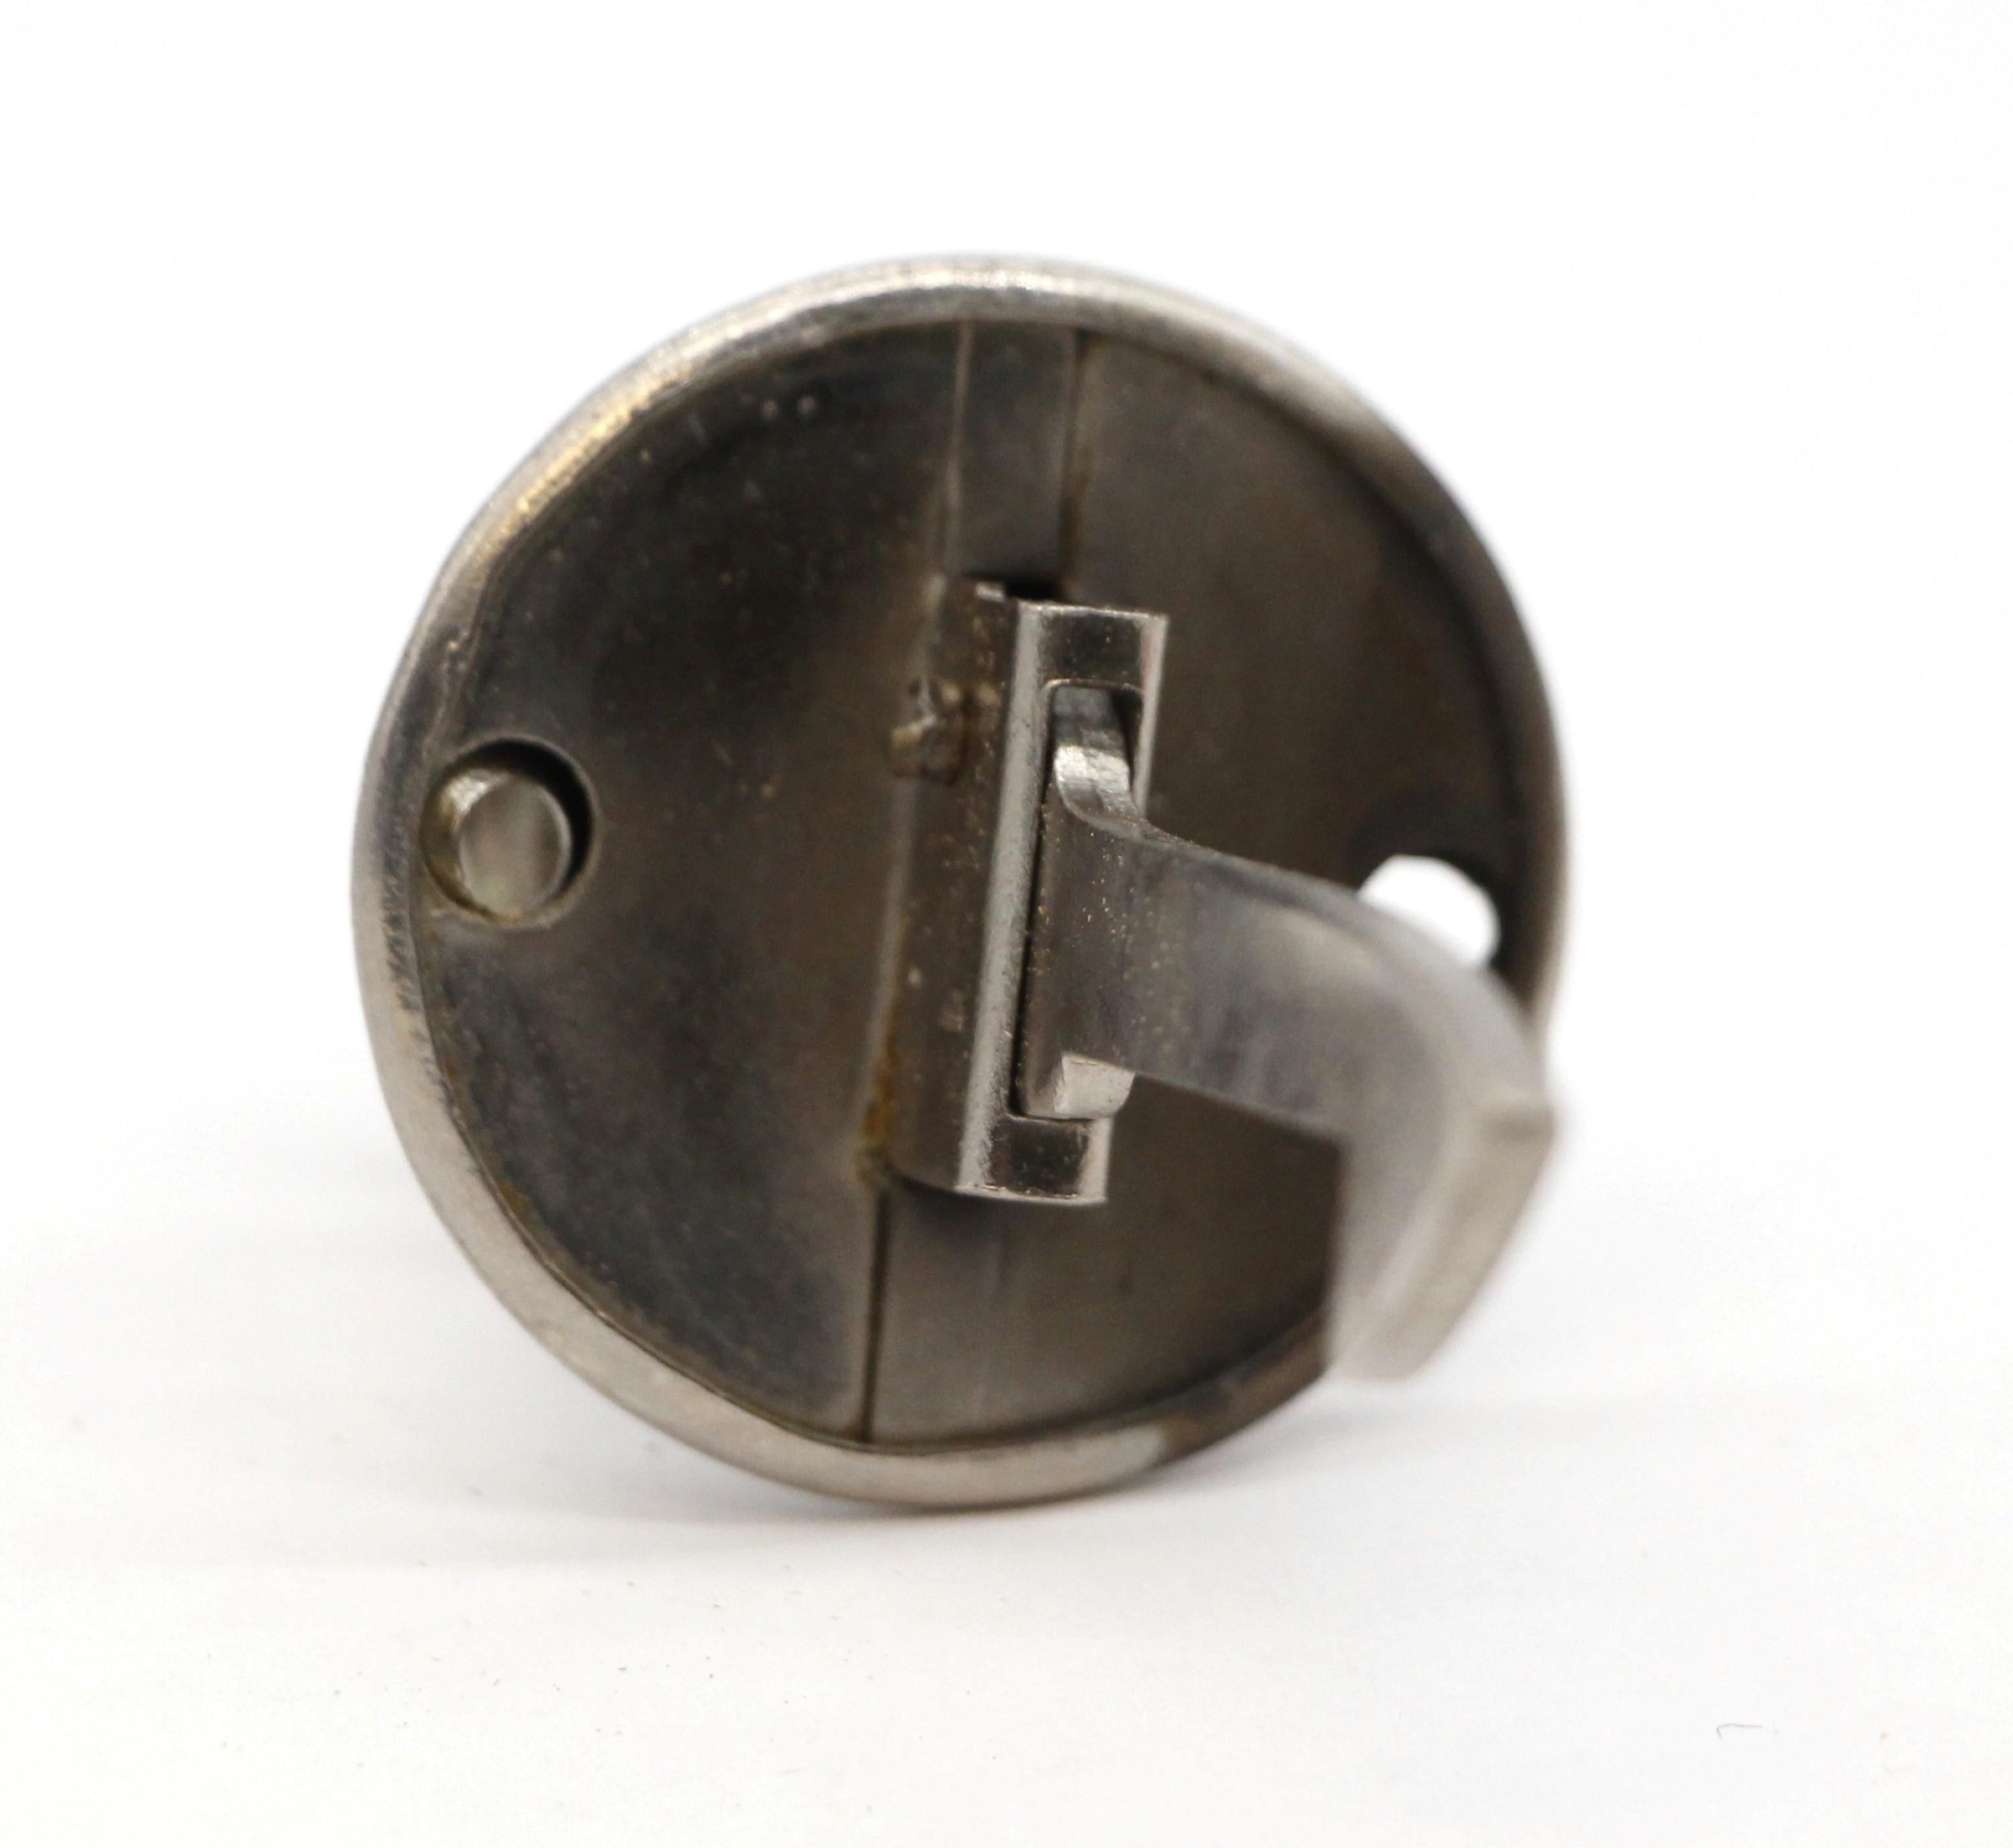  Keil of New York Nickel Cabinet Push Button Catch Knob Old New Stock  For Sale 3